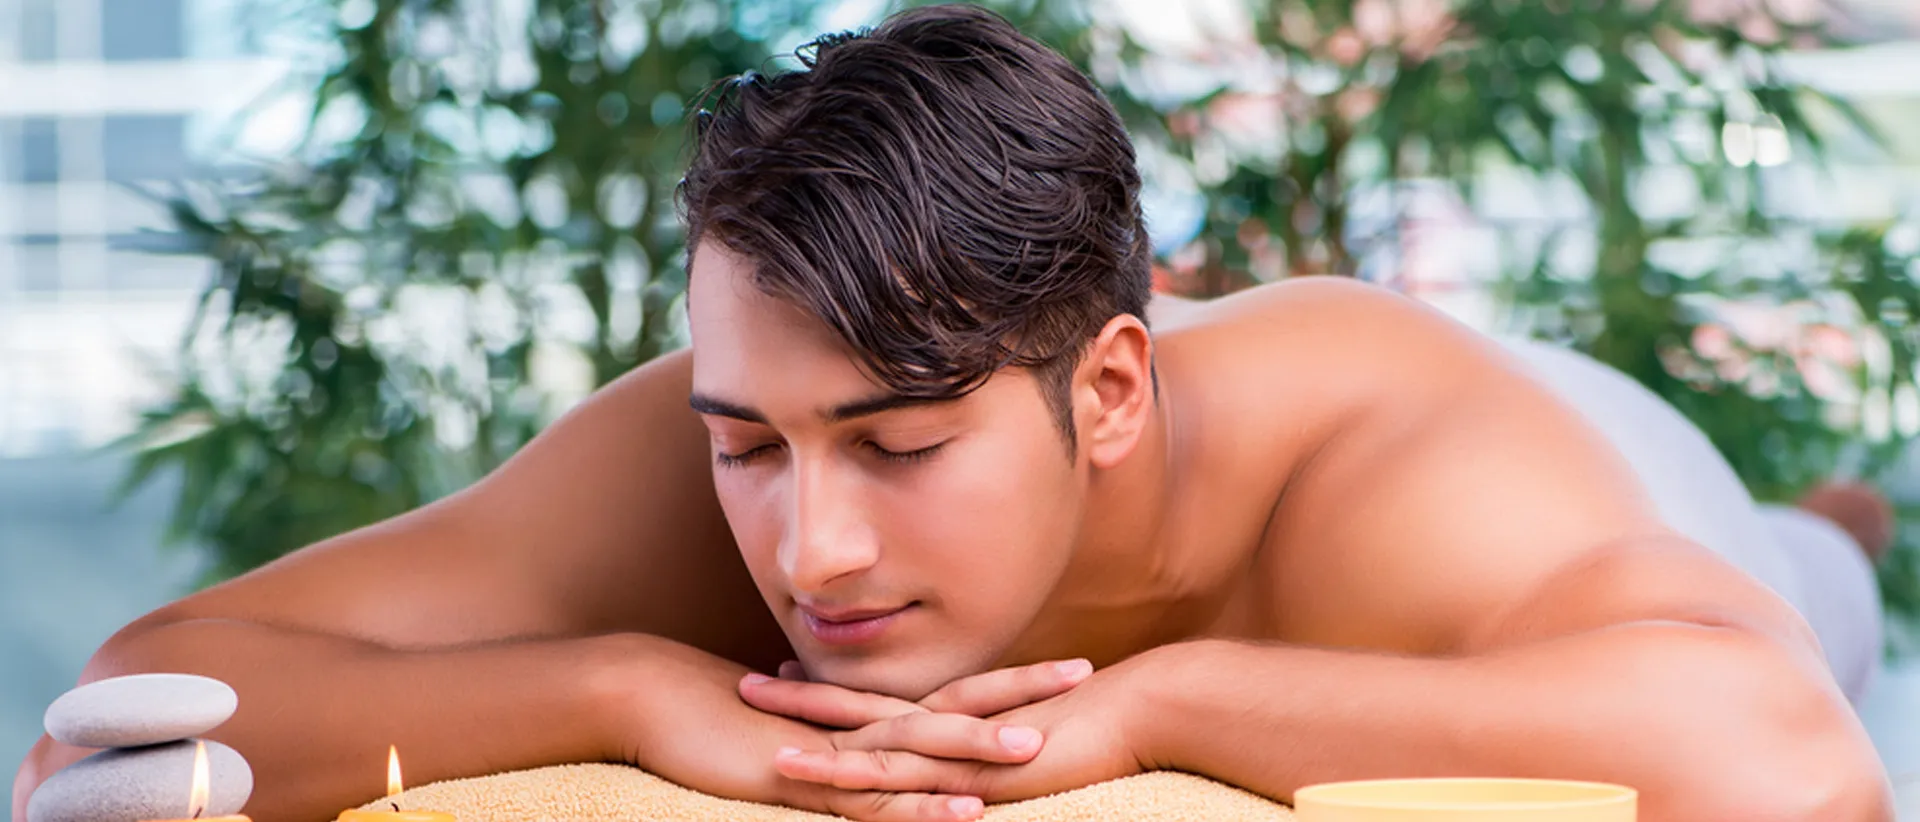 Man relaxing during an aromatherapy massage.